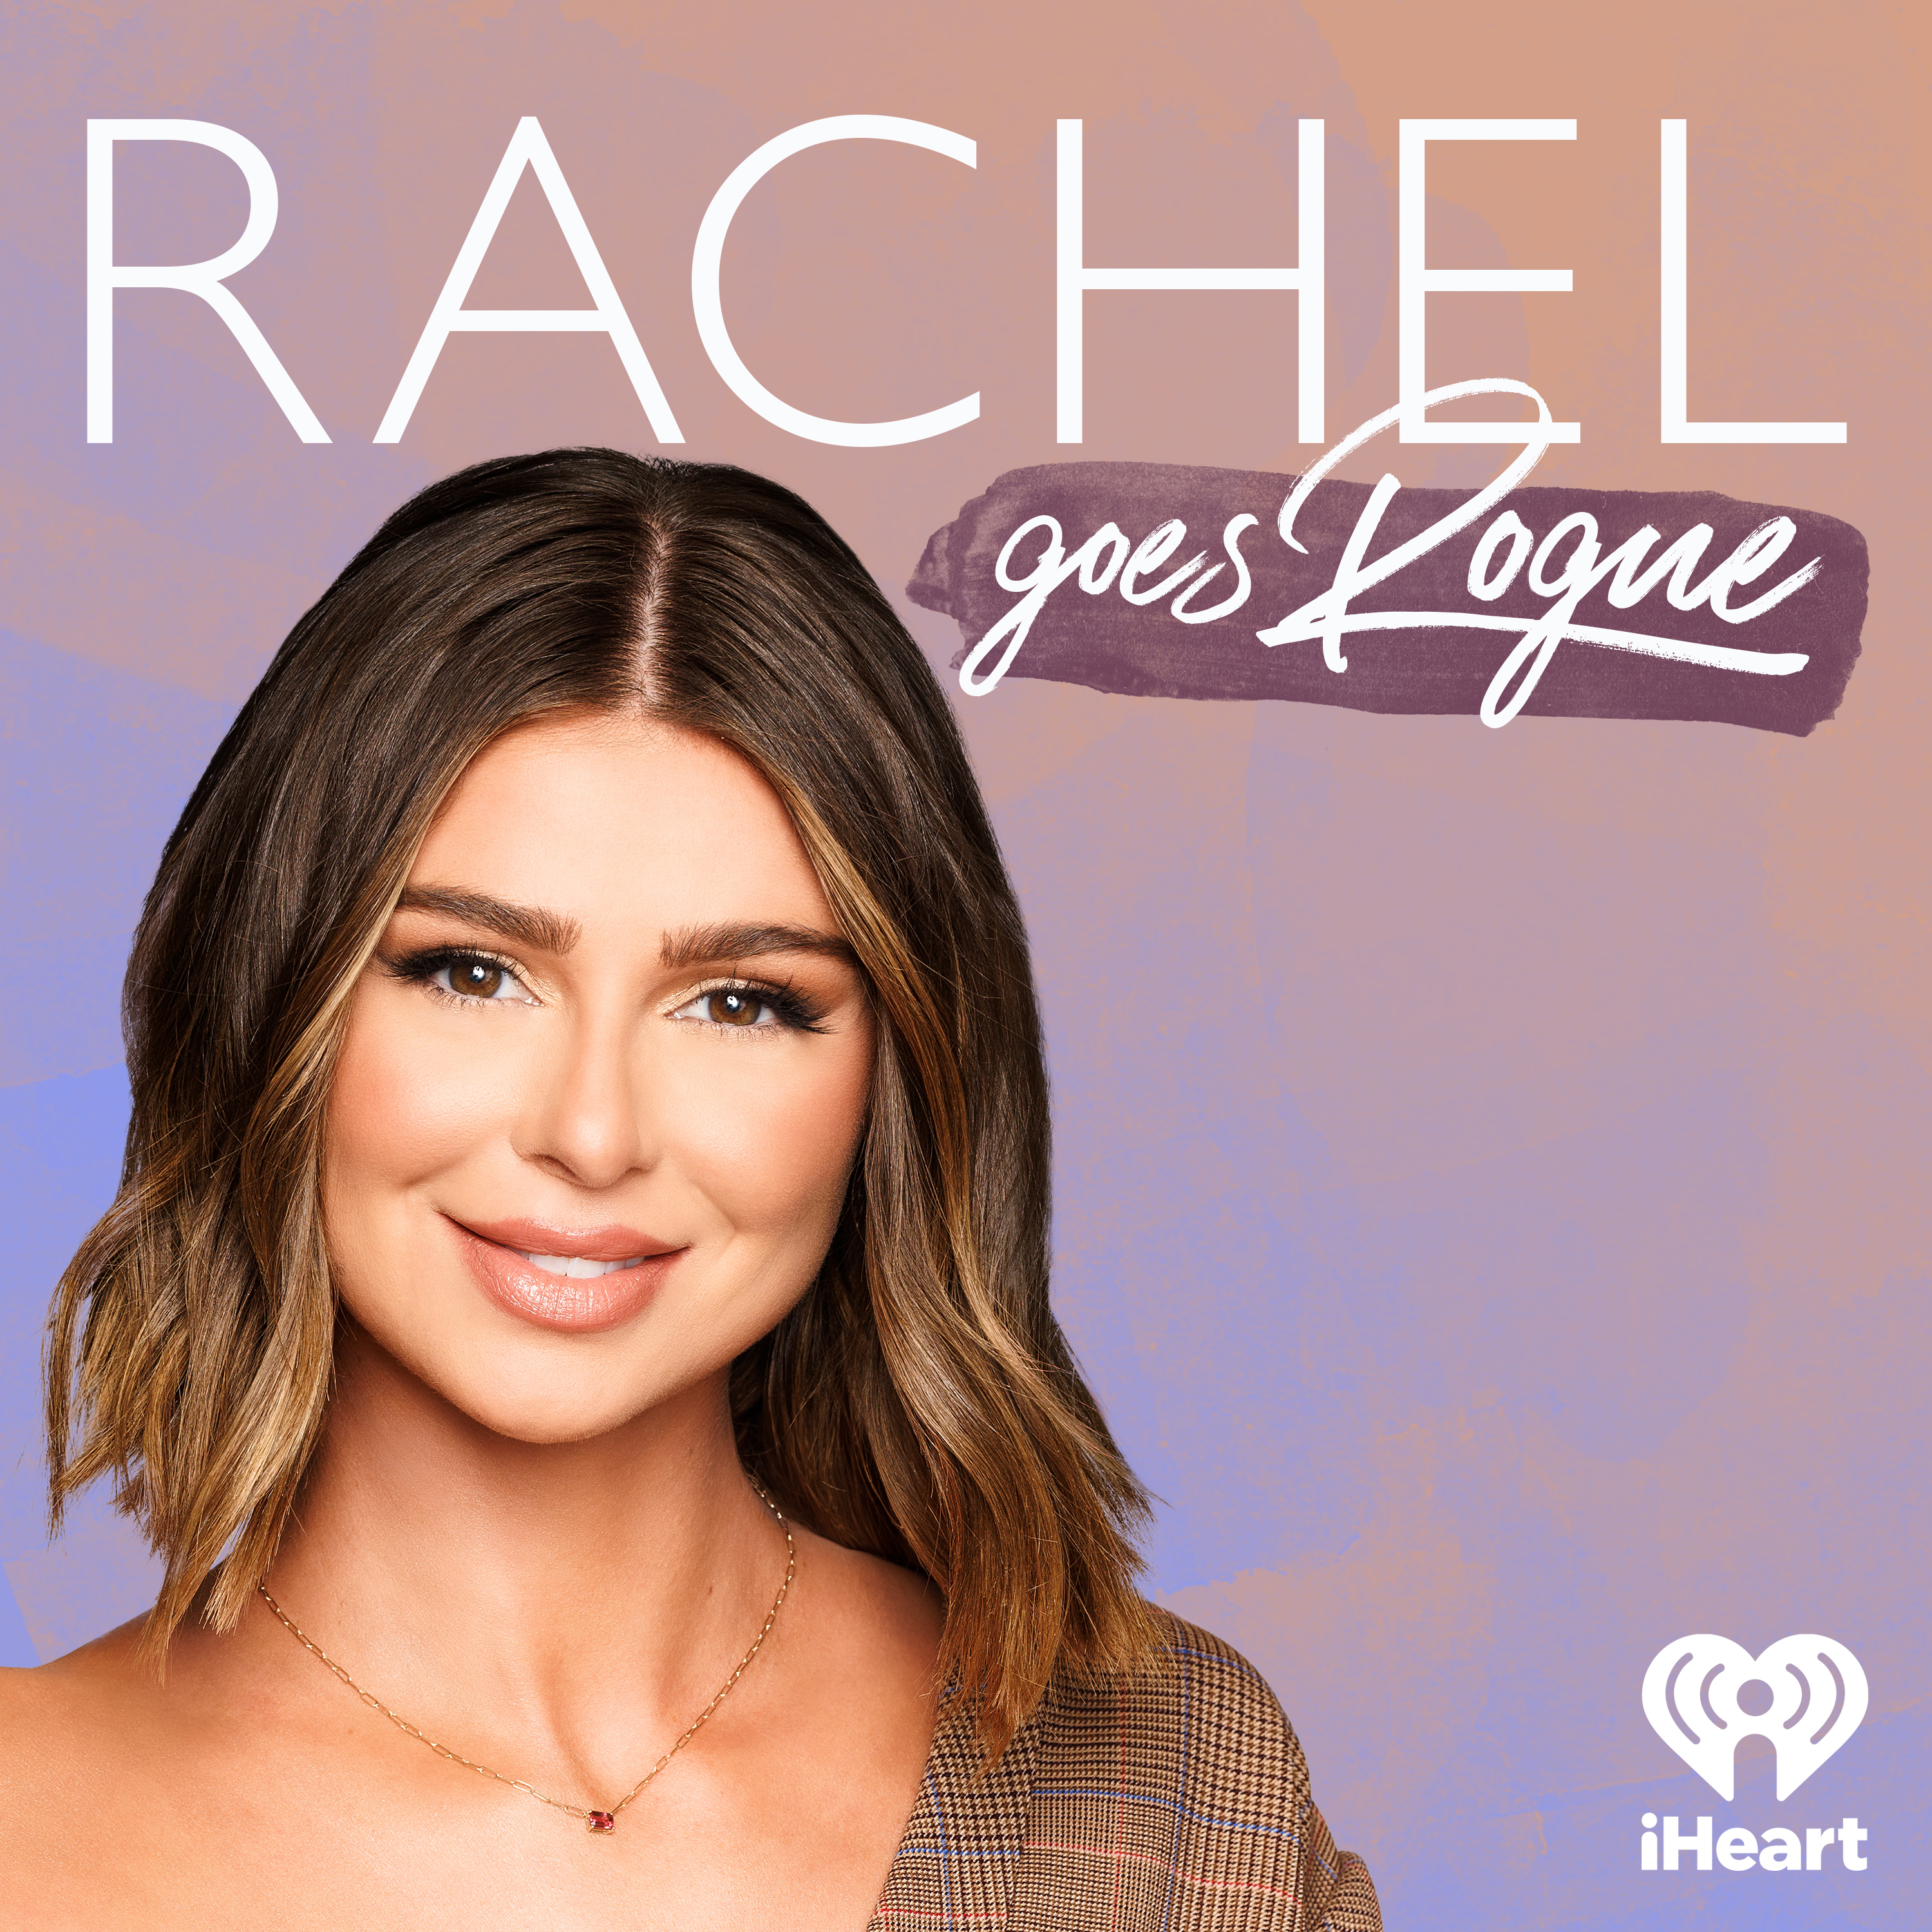 Introducing: Rachel Goes Rogue by iHeartPodcasts